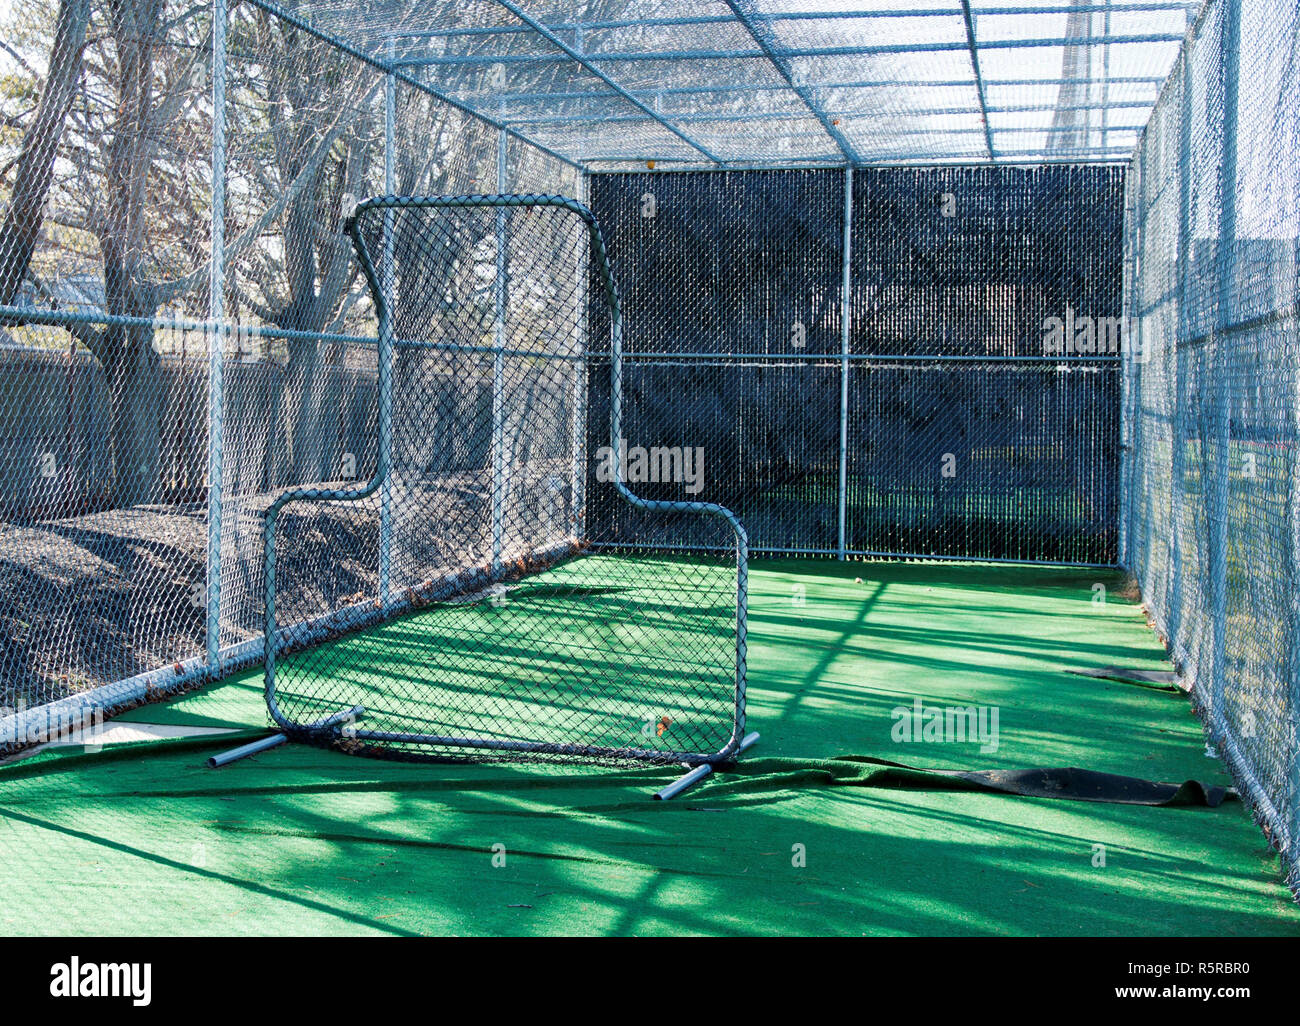 The view from inside a baseball batting cage from behind the pitching screen Stock Photo